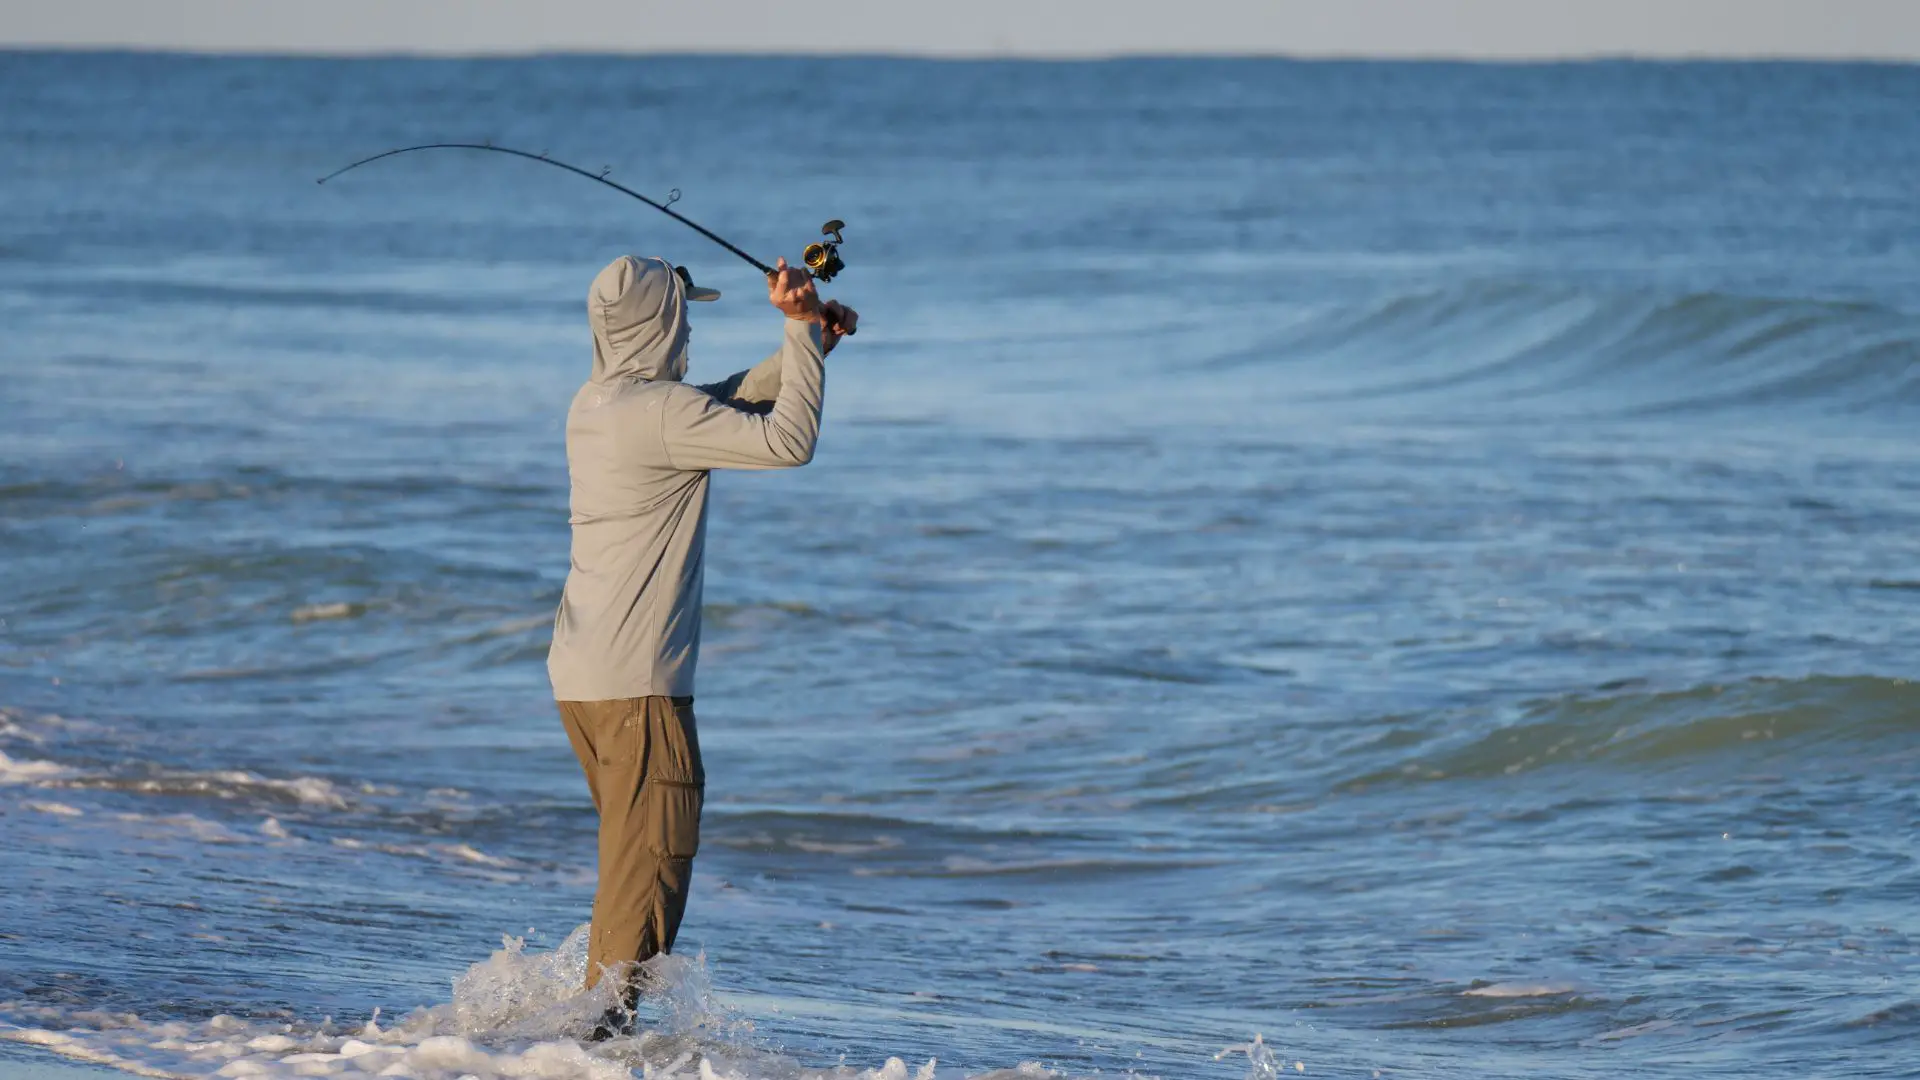 Surf Fishing - Review of the Best Surf Fishing Reels